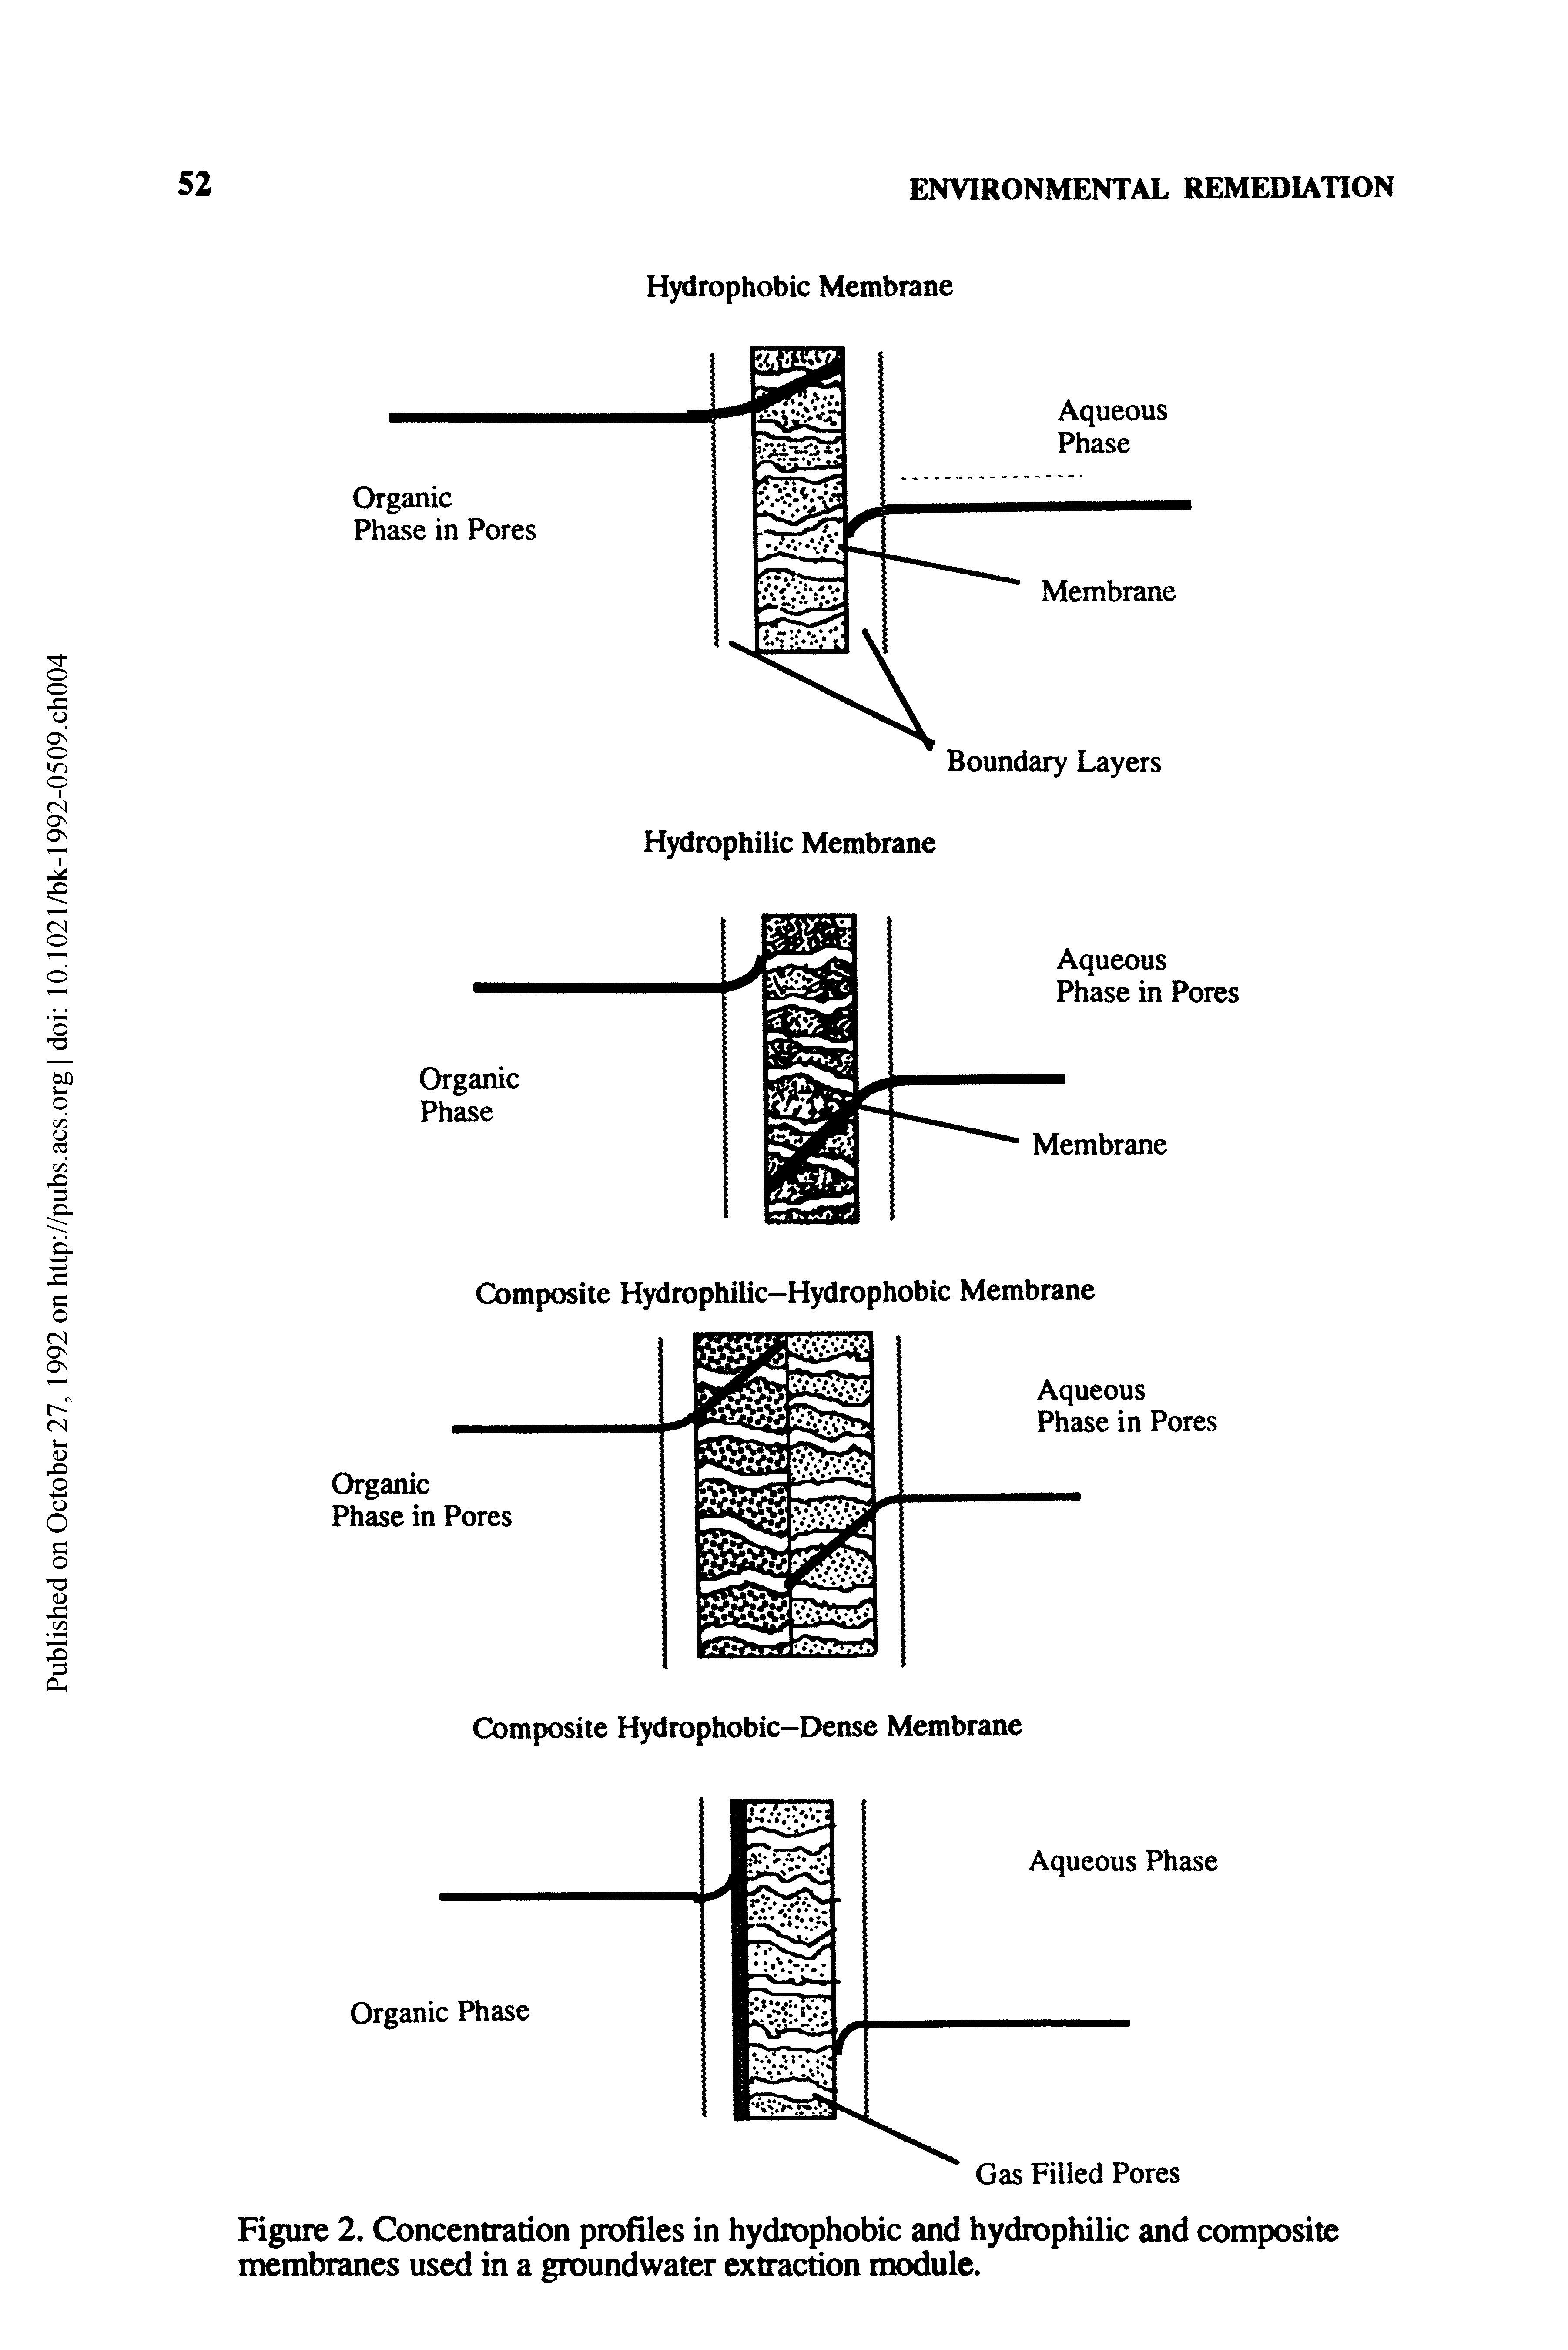 Figure 2. Concentration profiles in hydrophobic and hydrophilic and composite membranes used in a groundwater extraction nxxiule.